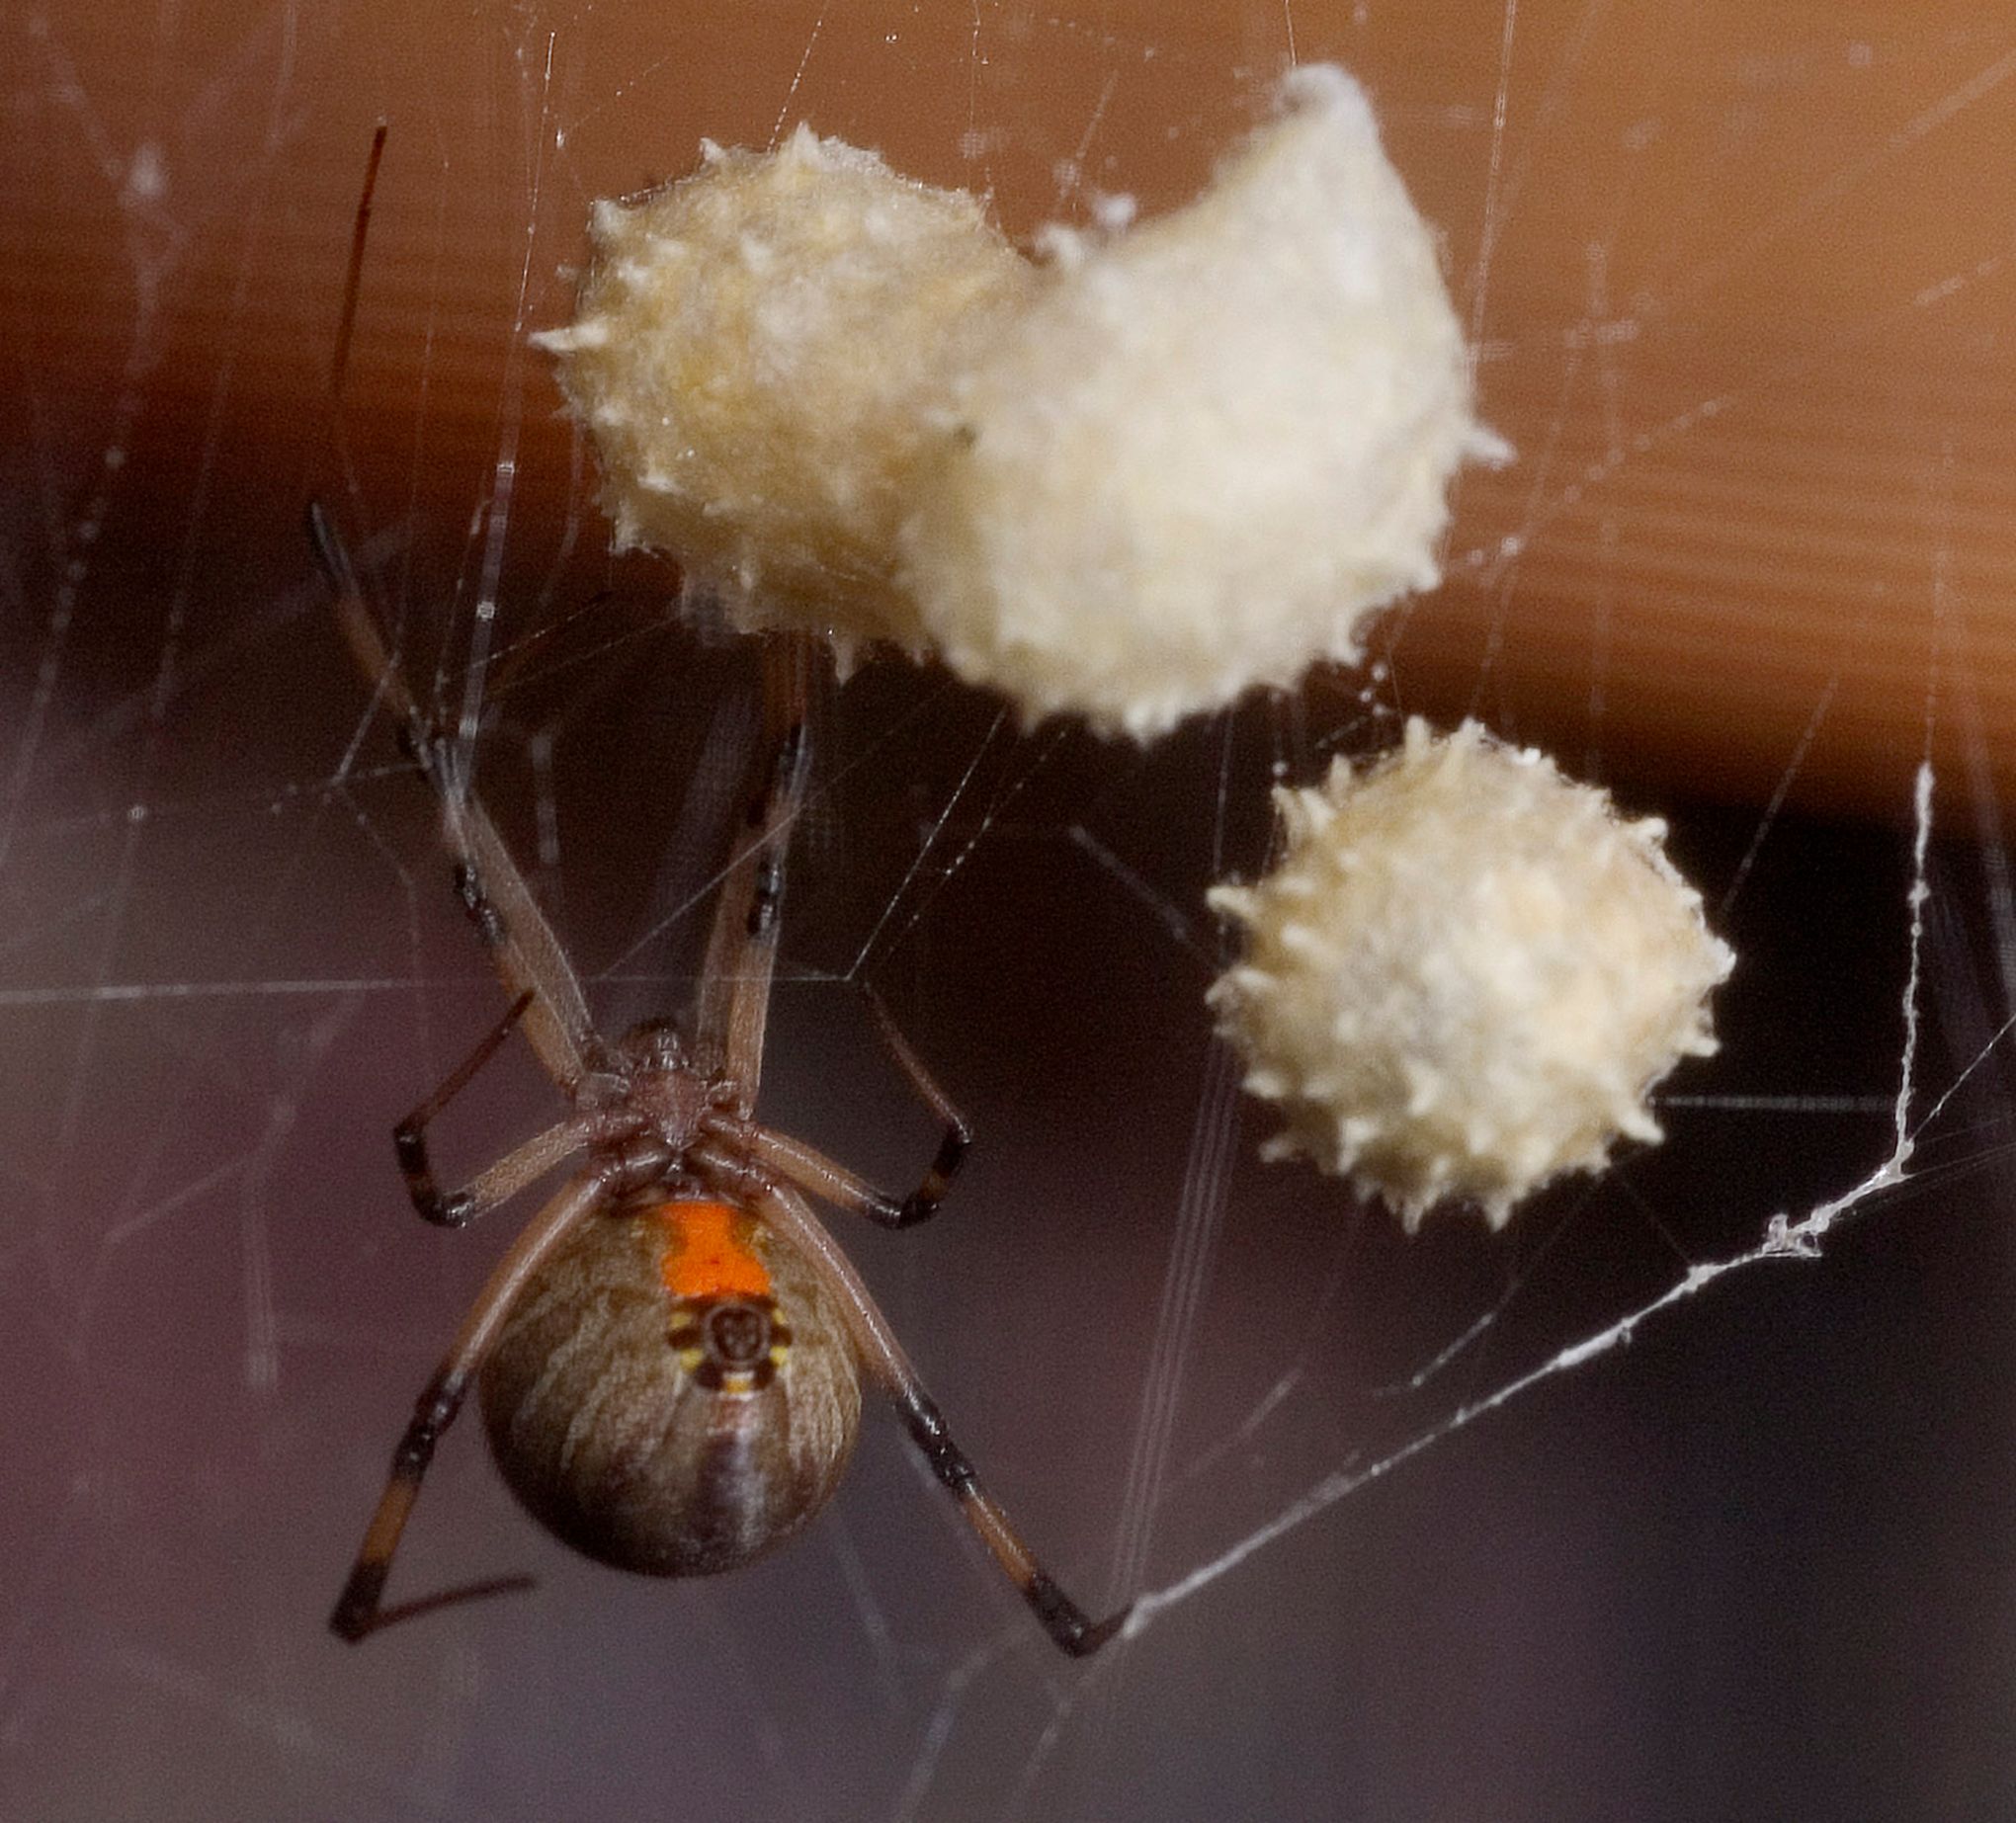 Black Widow Spiders Are Being Killed Off by Non-Native Brown